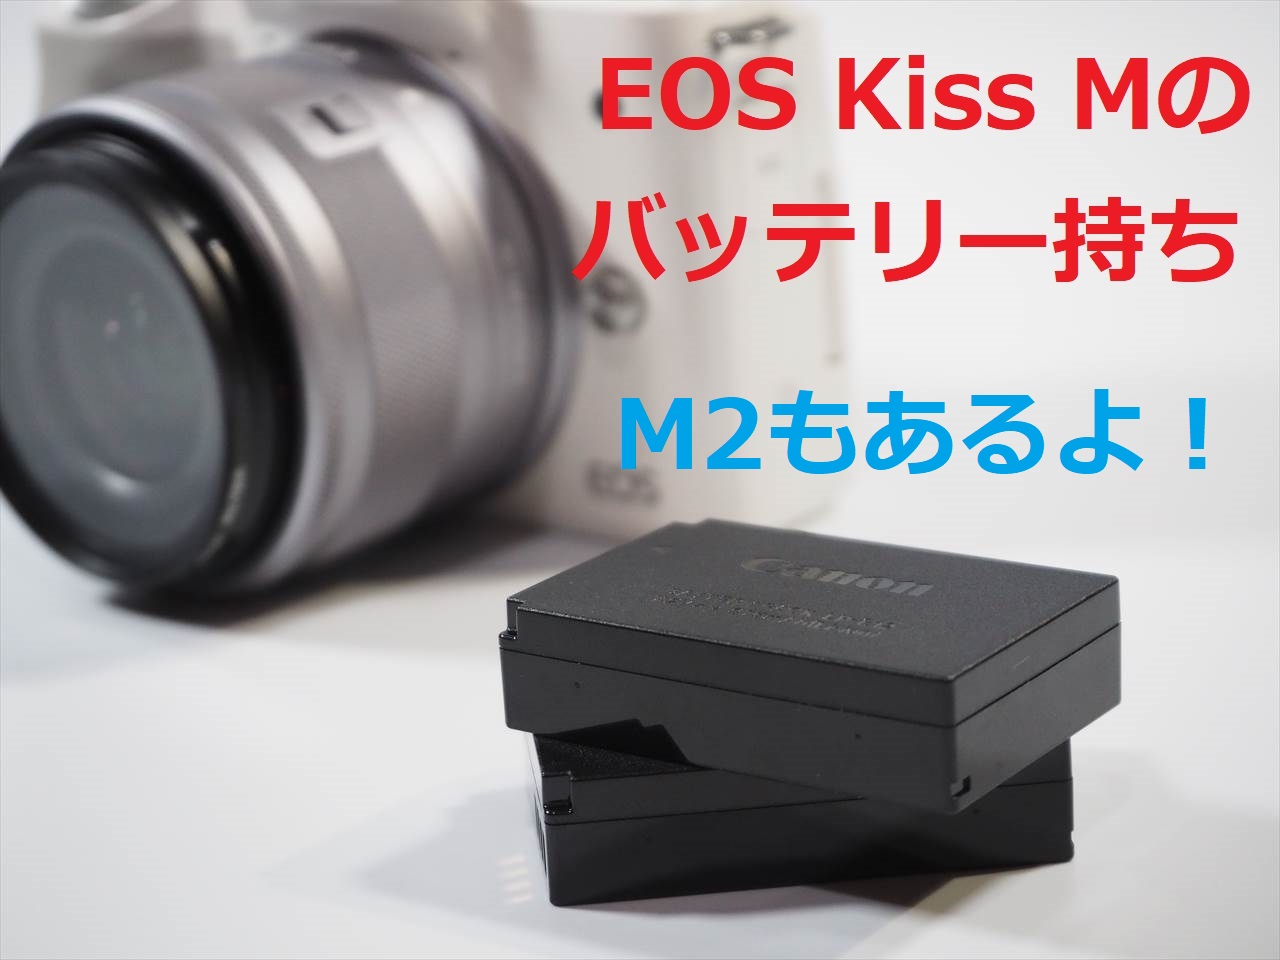 Canon EOS Kiss M Wレンズキット フィルター類・予備バッテリー